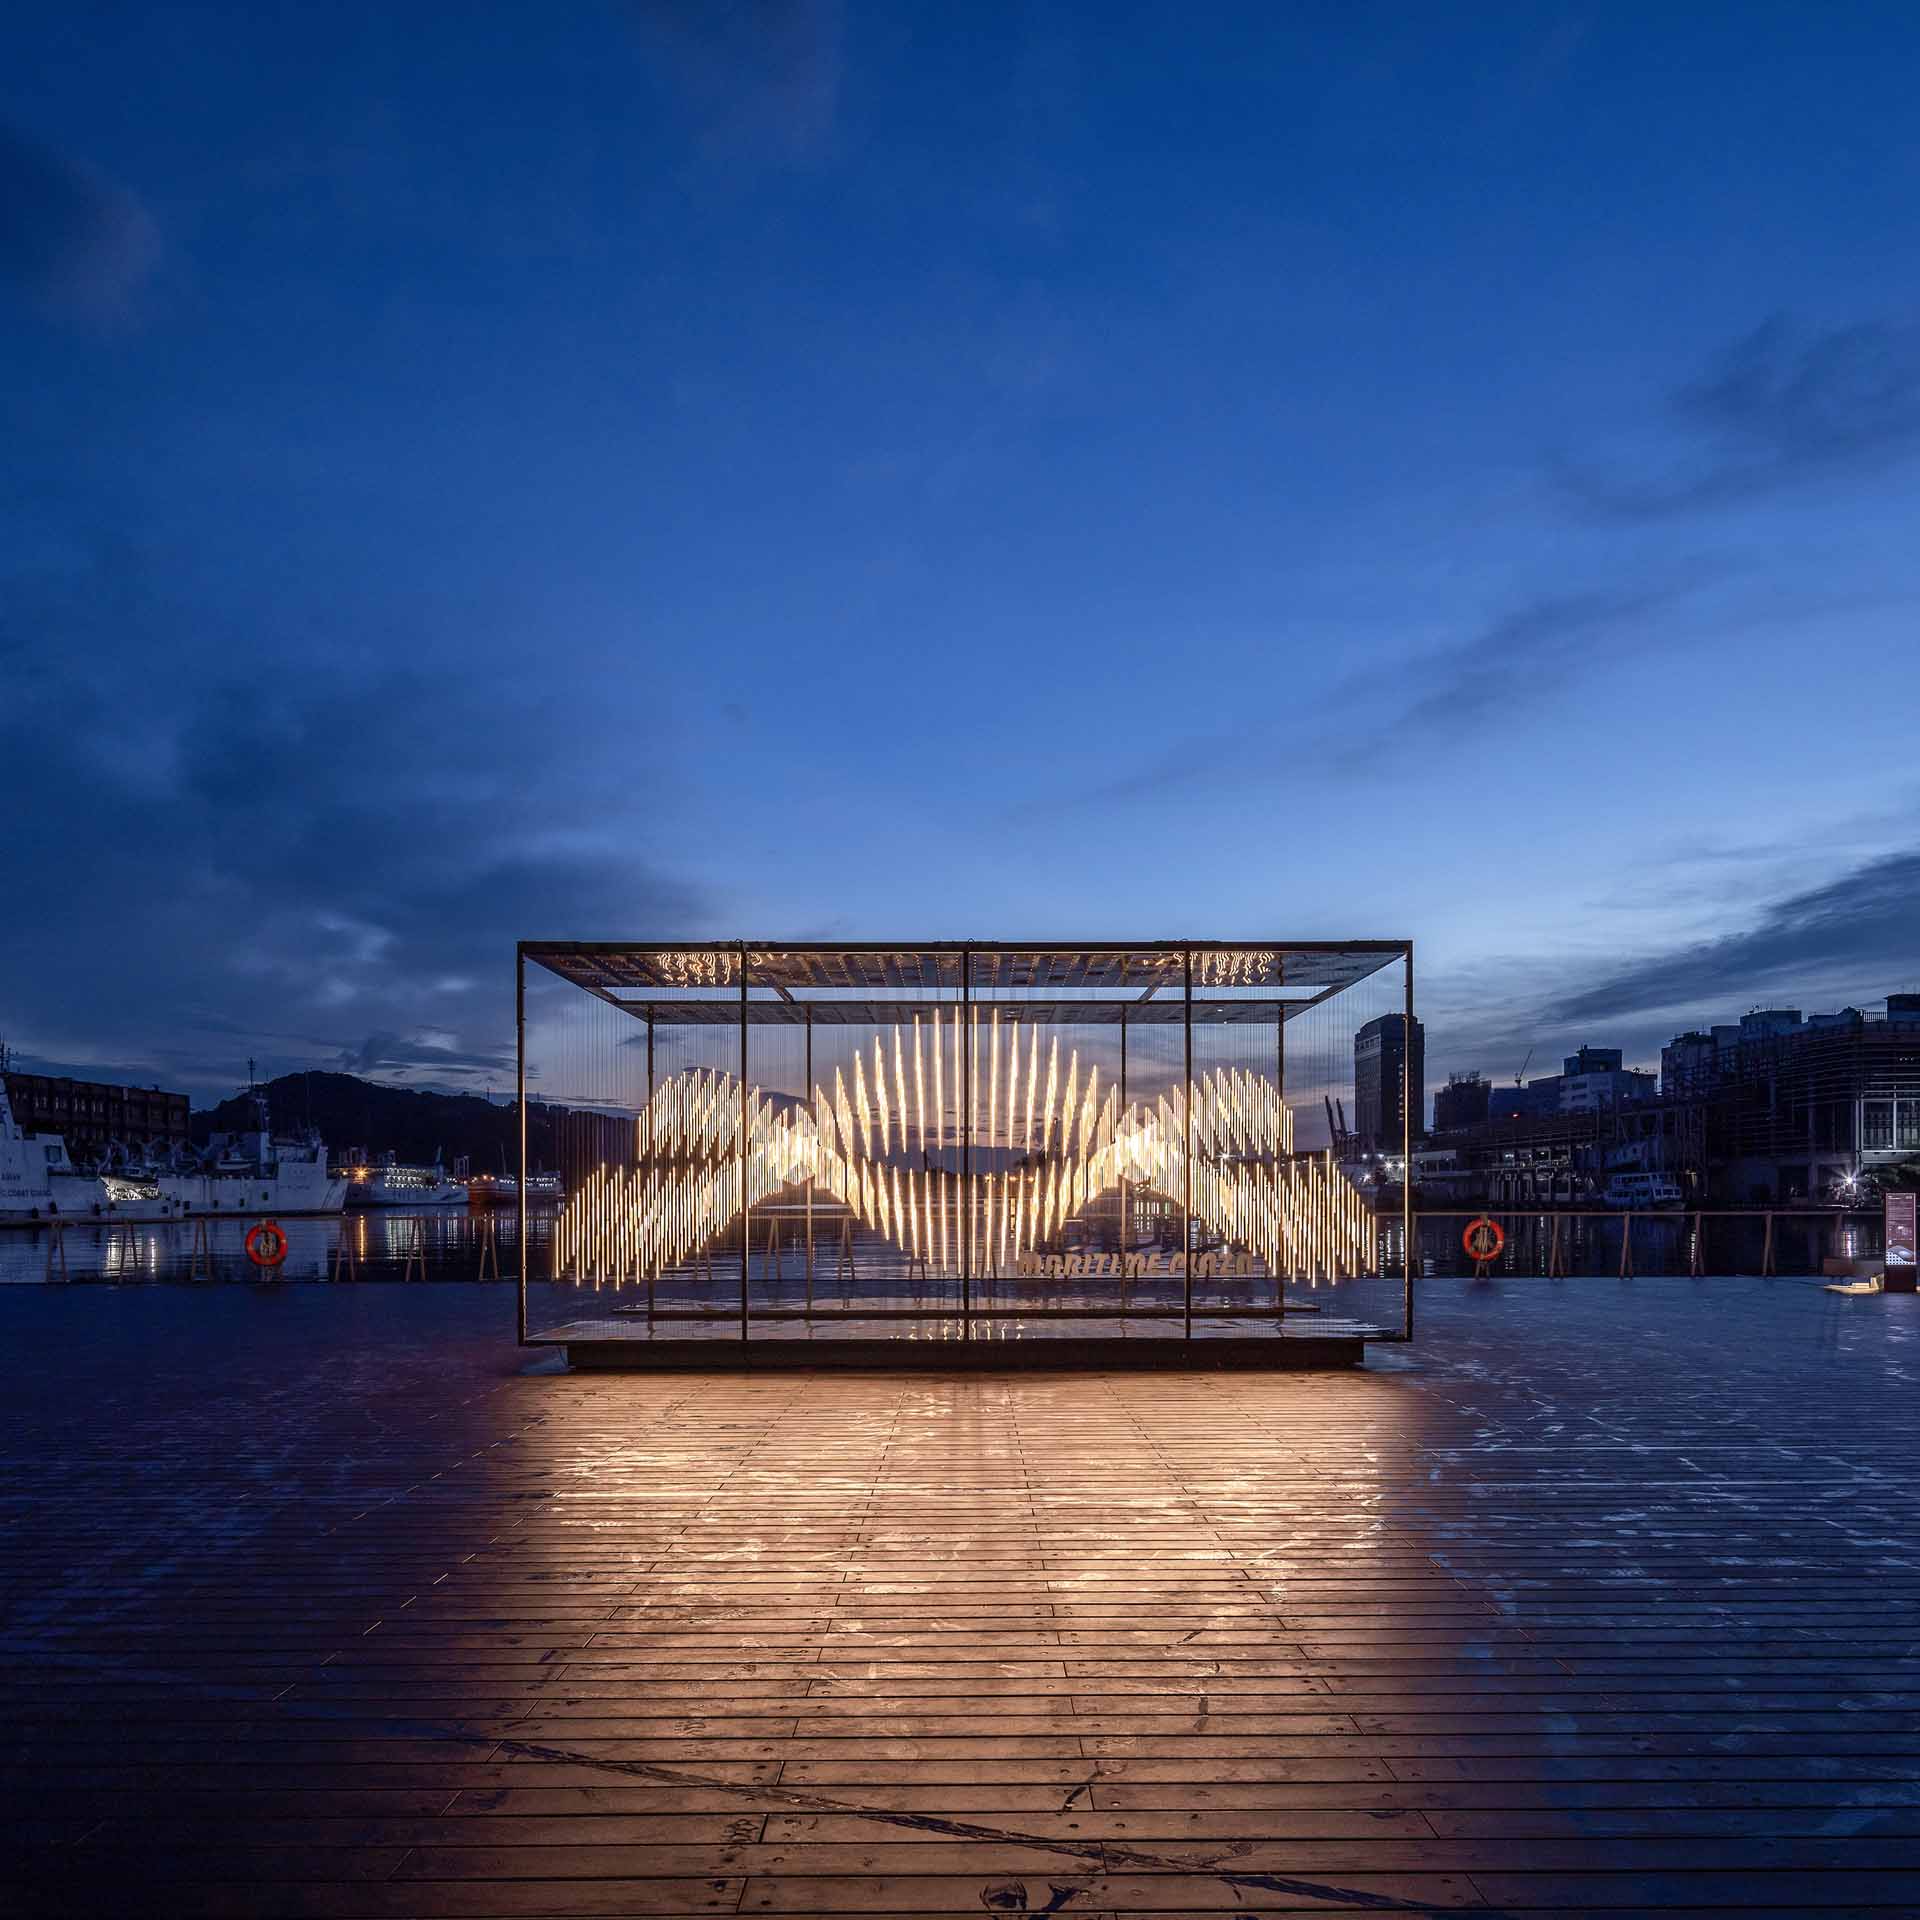 The artwork finds its inspiration in Keelung's ocean, nestled along the serene northern coast of Taiwan. The installation's lights adapt instantly to the wind's strength and direction, unveiling the subtle shifts in the breeze.